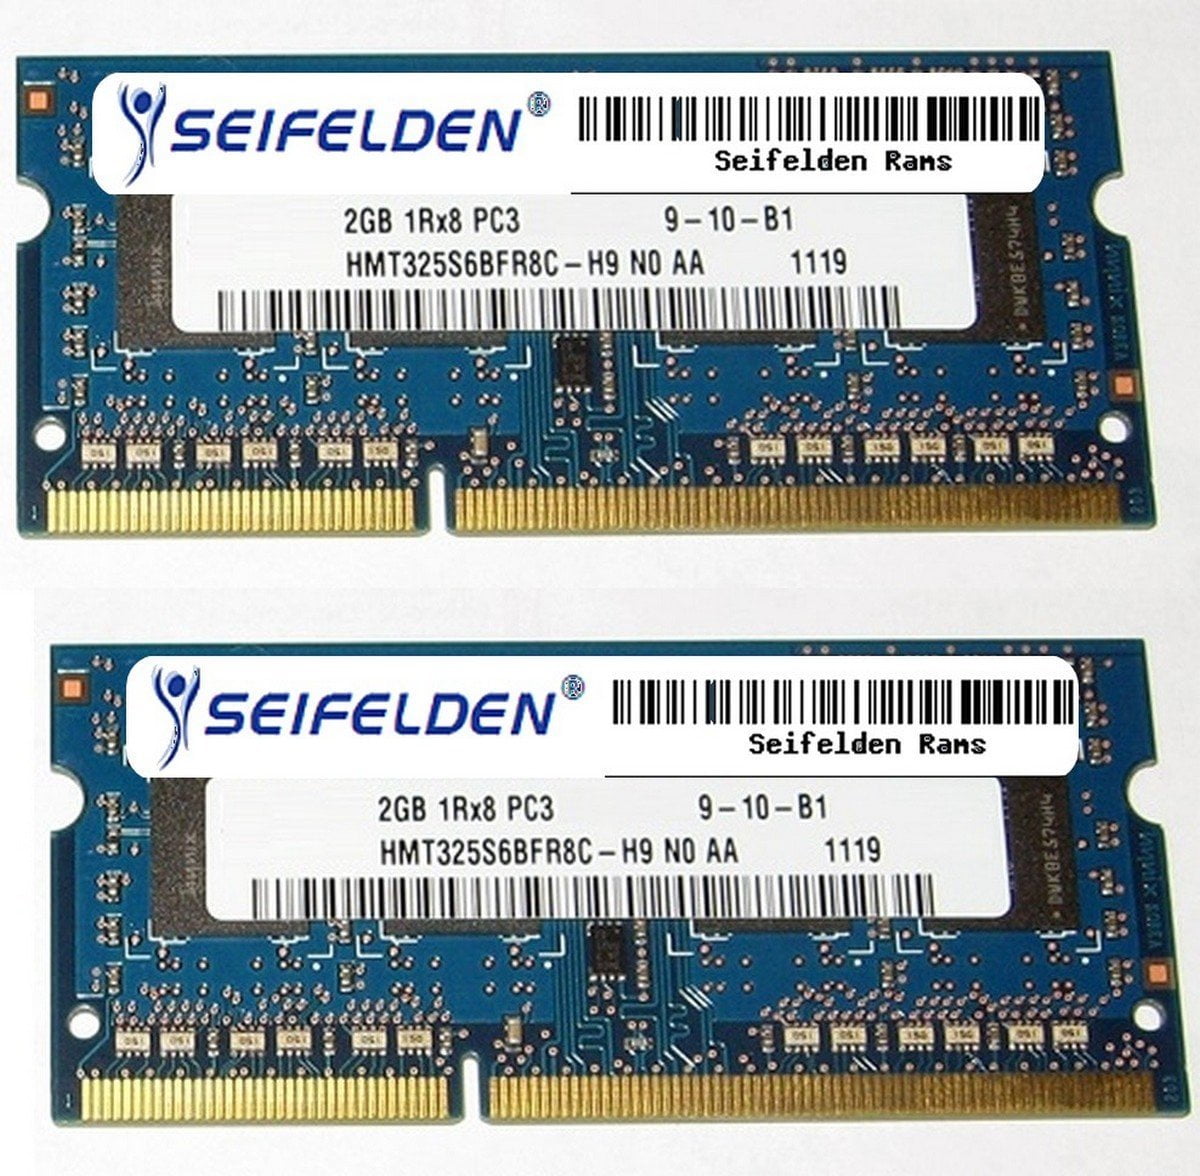 4GB Team High Performance Memory RAM Upgrade Single Stick For Toshiba Satellite Pro L350-233 L350-236 L350-236 L450-13L Laptop The Memory Kit comes with Life Time Warranty. 